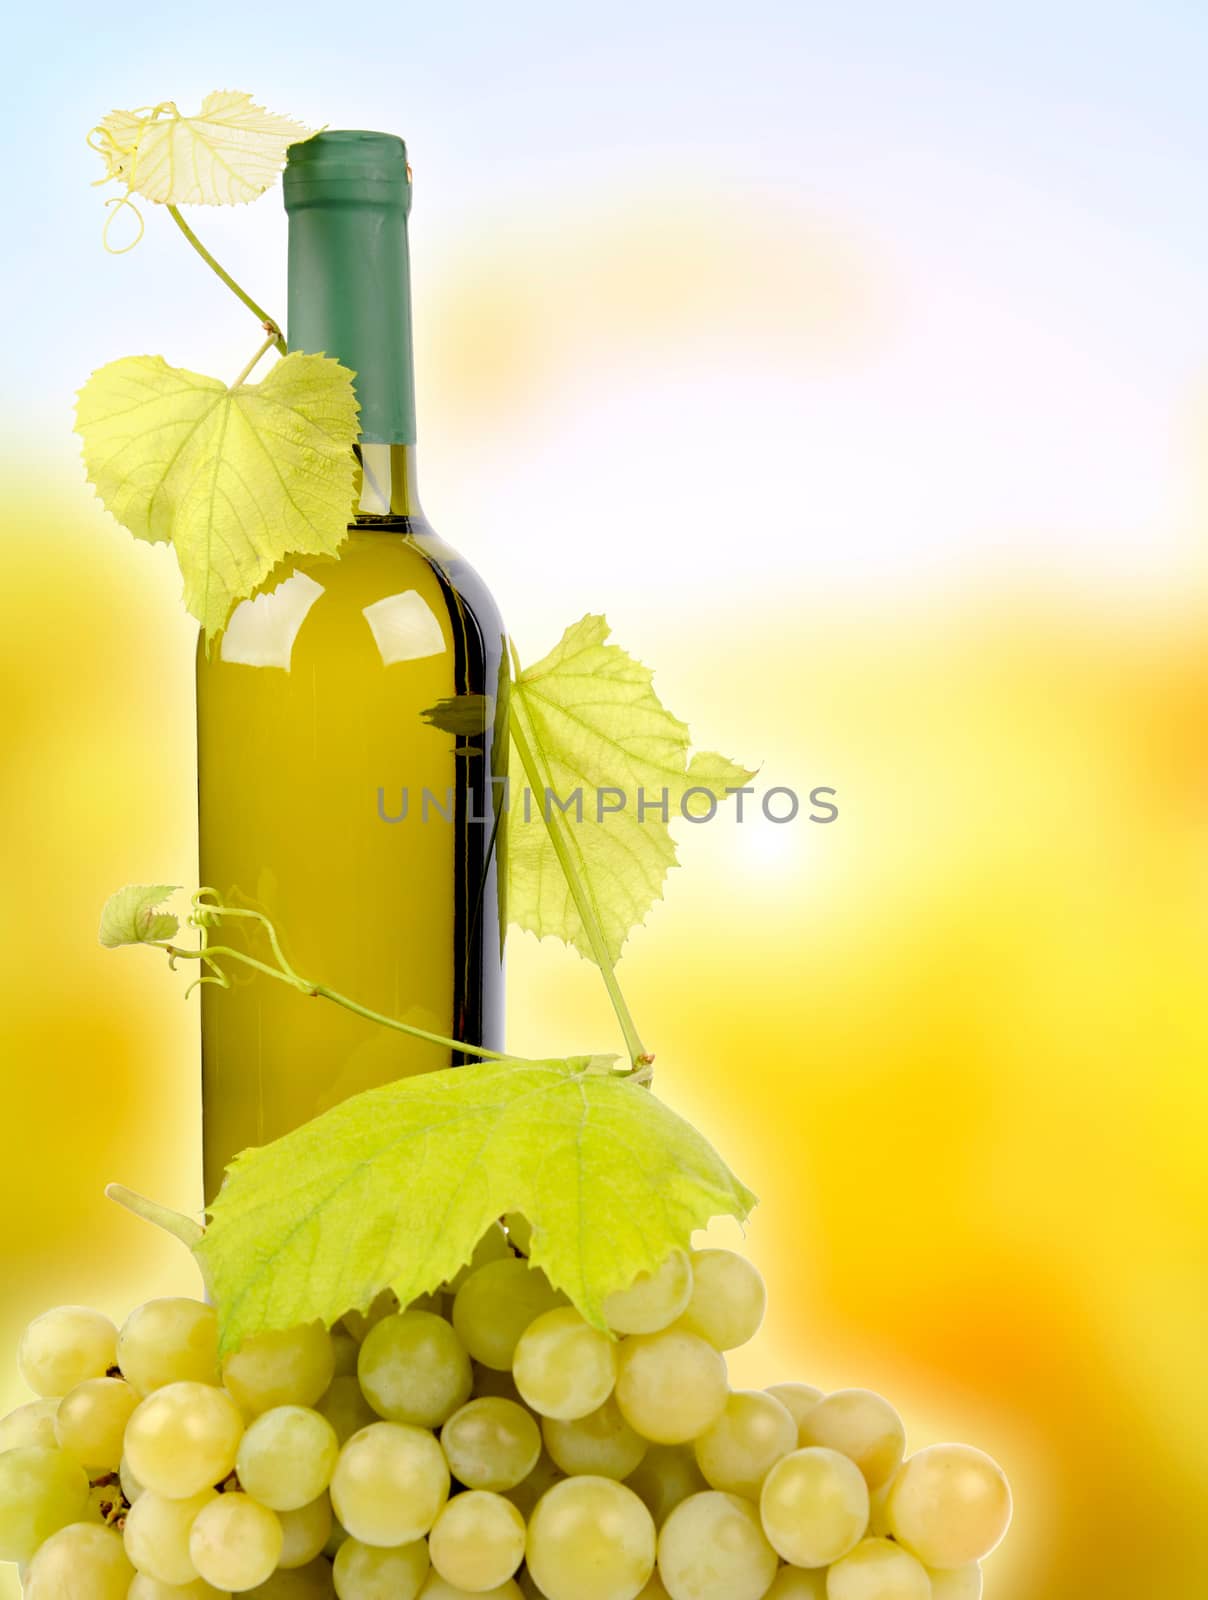 White wine bottle and grapes on background